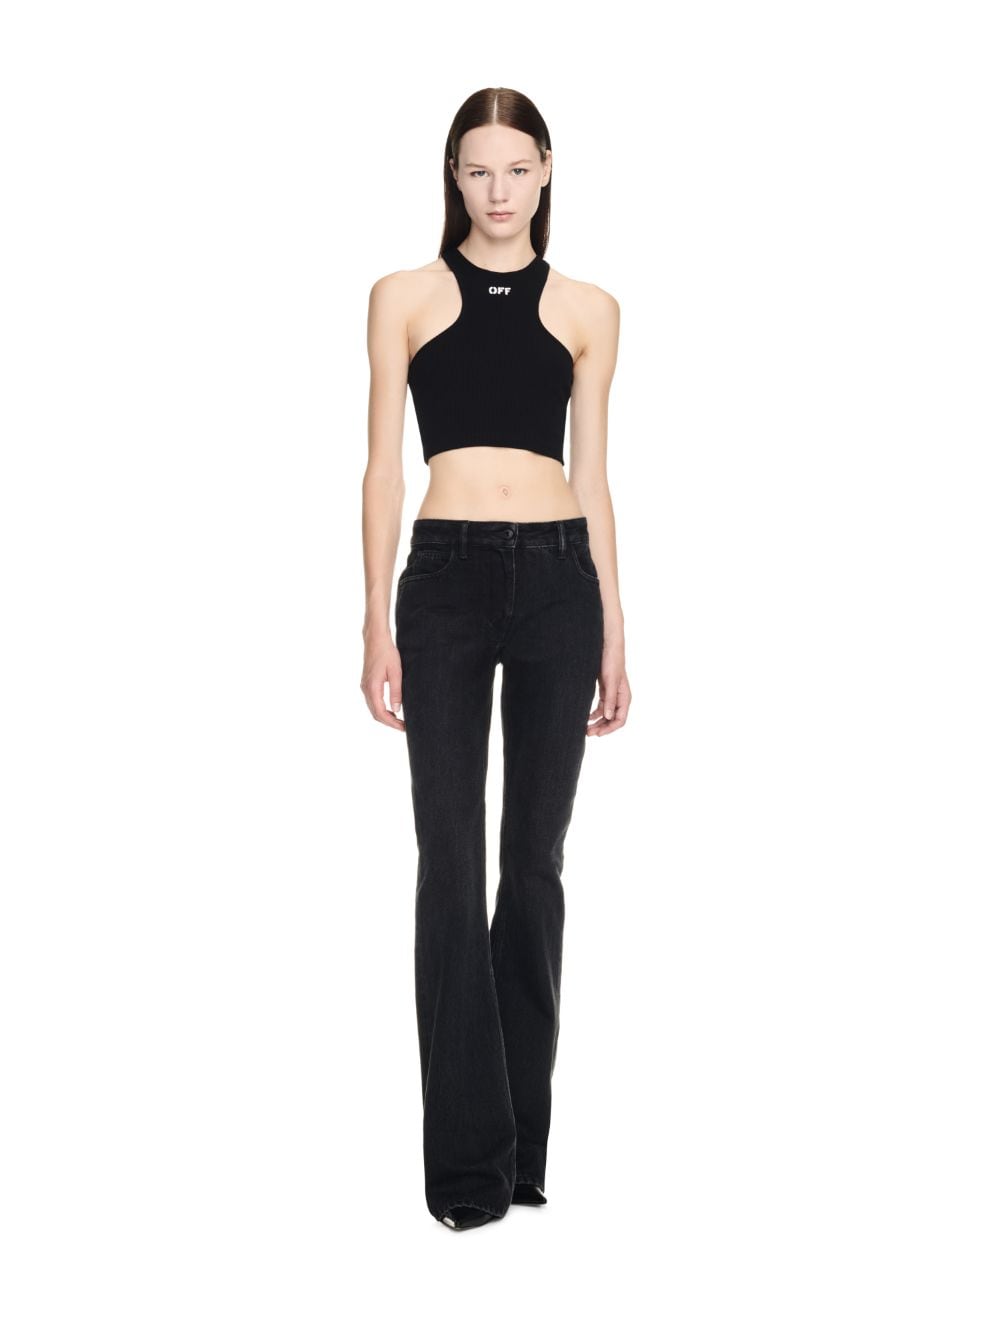 https://cdn-images.farfetch-contents.com/off-white-slim-flared-5pkt-pants_20189930_51810814_1000.jpg